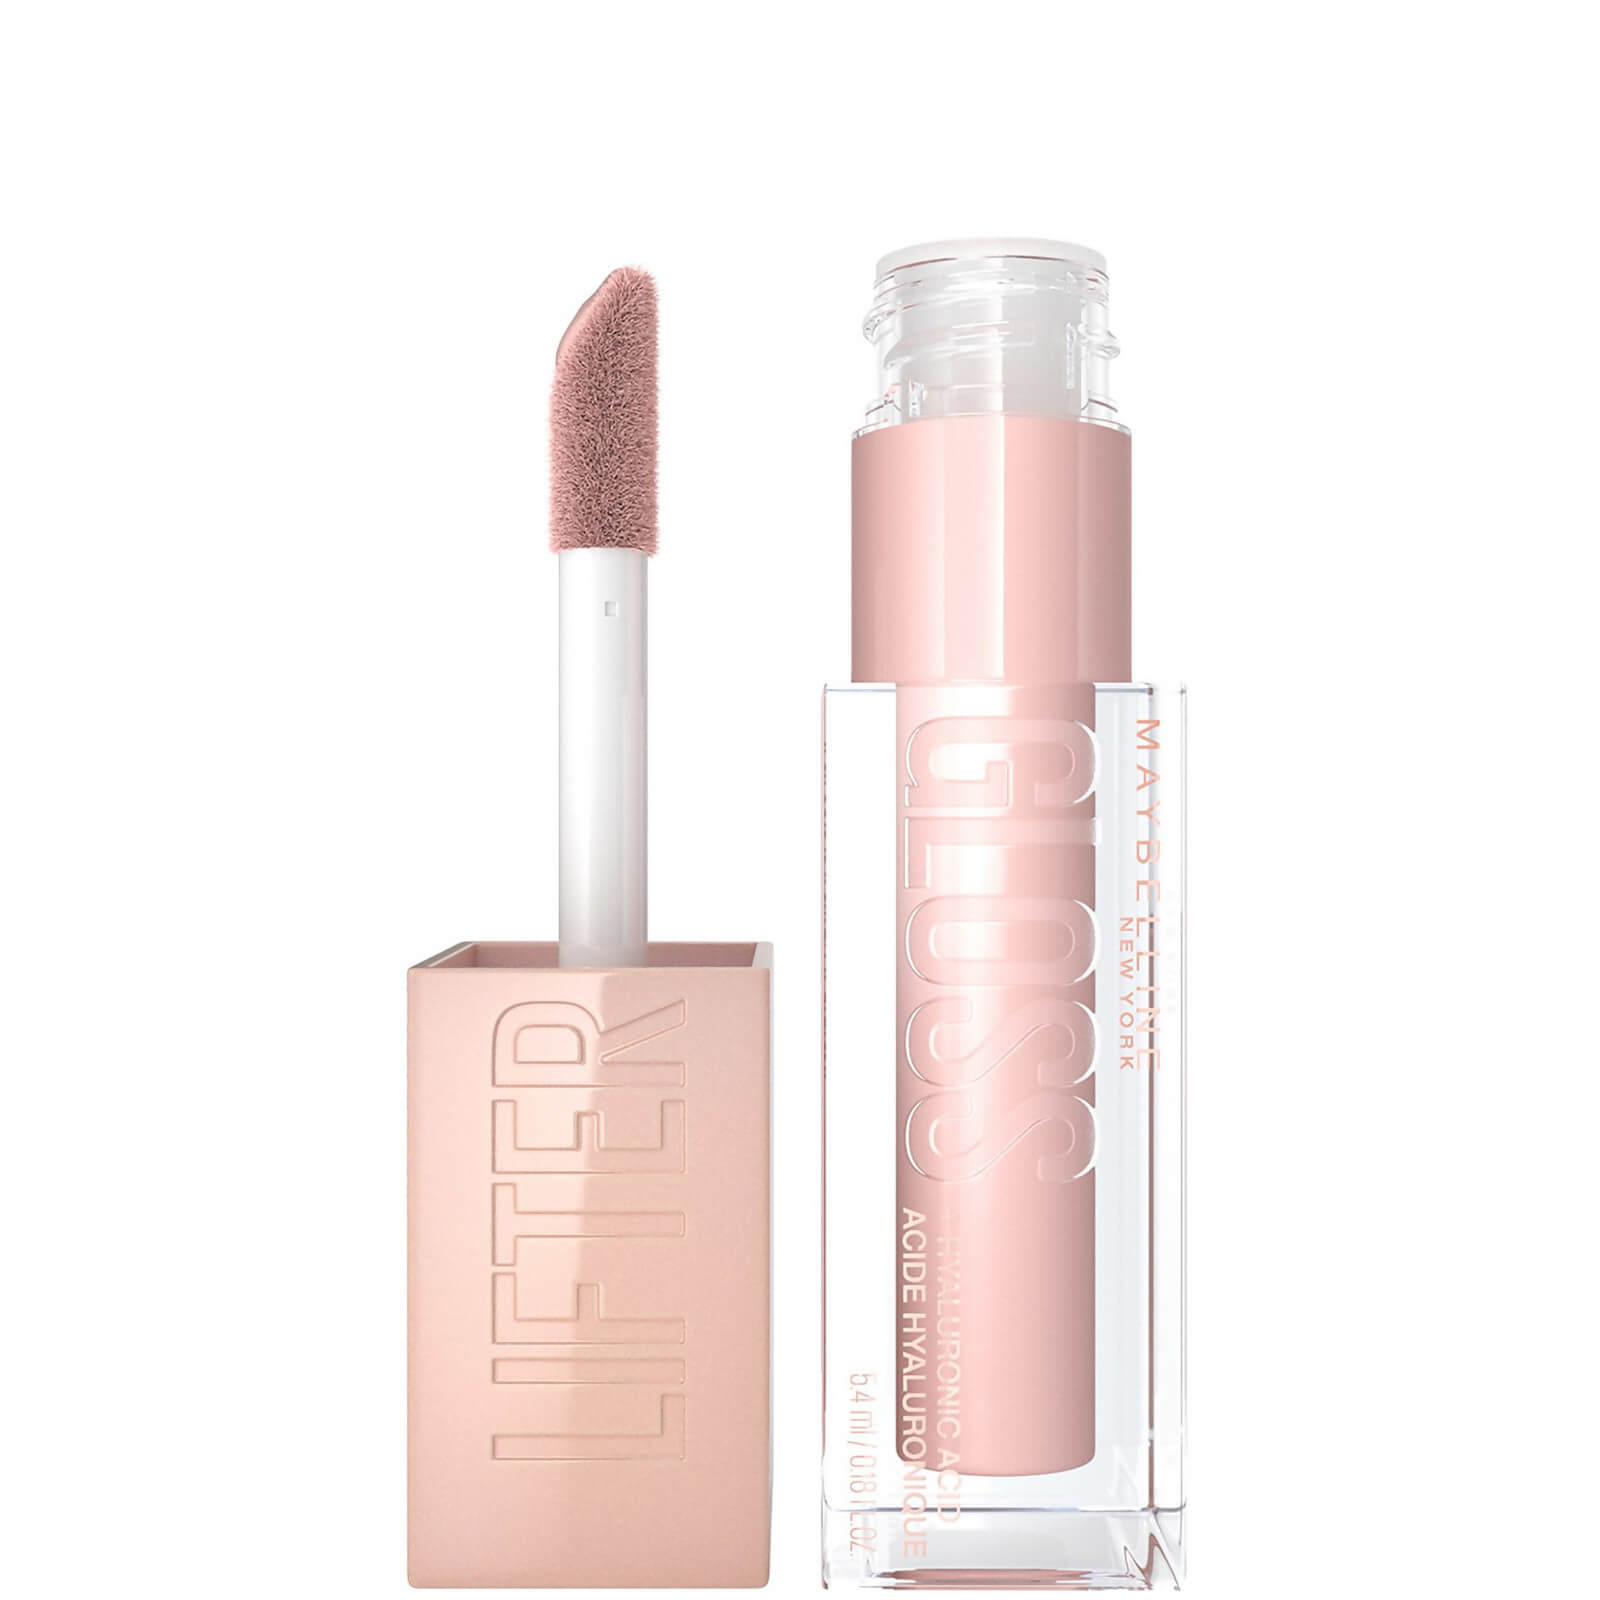 Photos - Lipstick & Lip Gloss Maybelline Lifter Gloss Hydrating Lip Gloss with Hyaluronic Acid 5g (Vario 